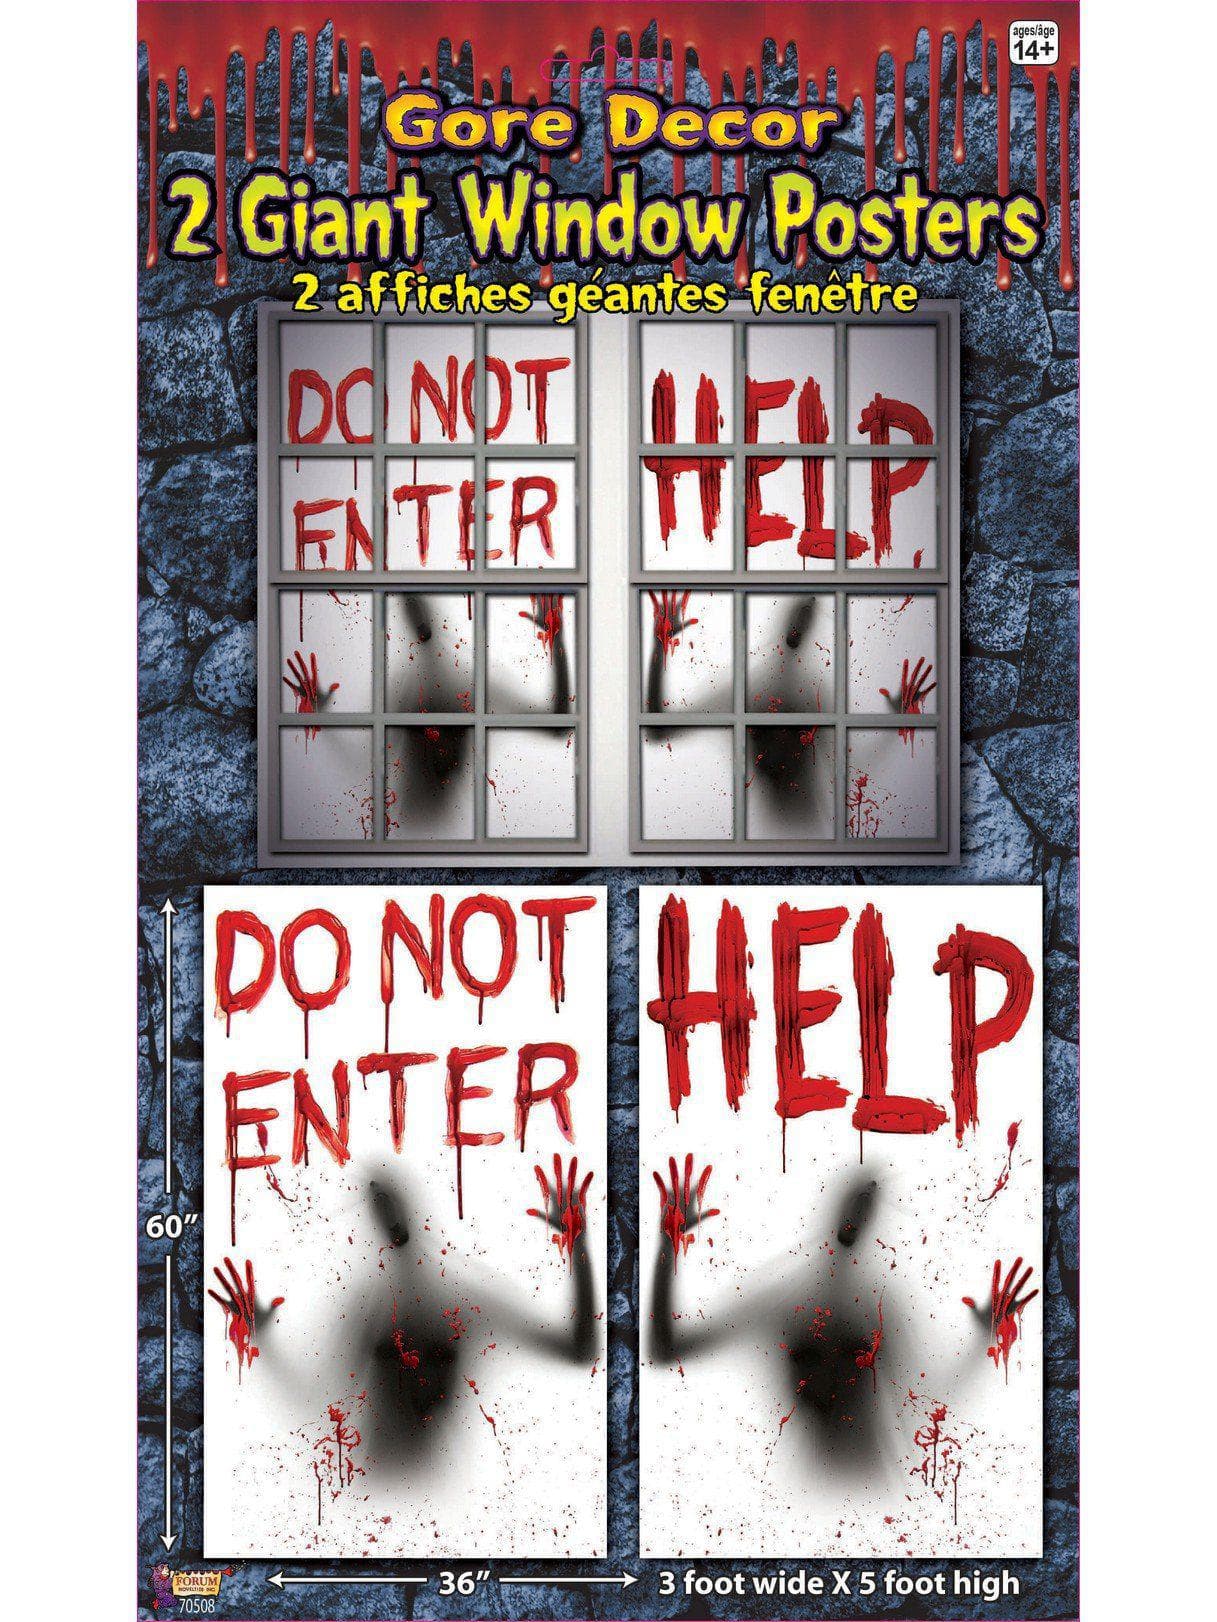 Gore Decor 2 Giant Bloody Window Posters - costumes.com